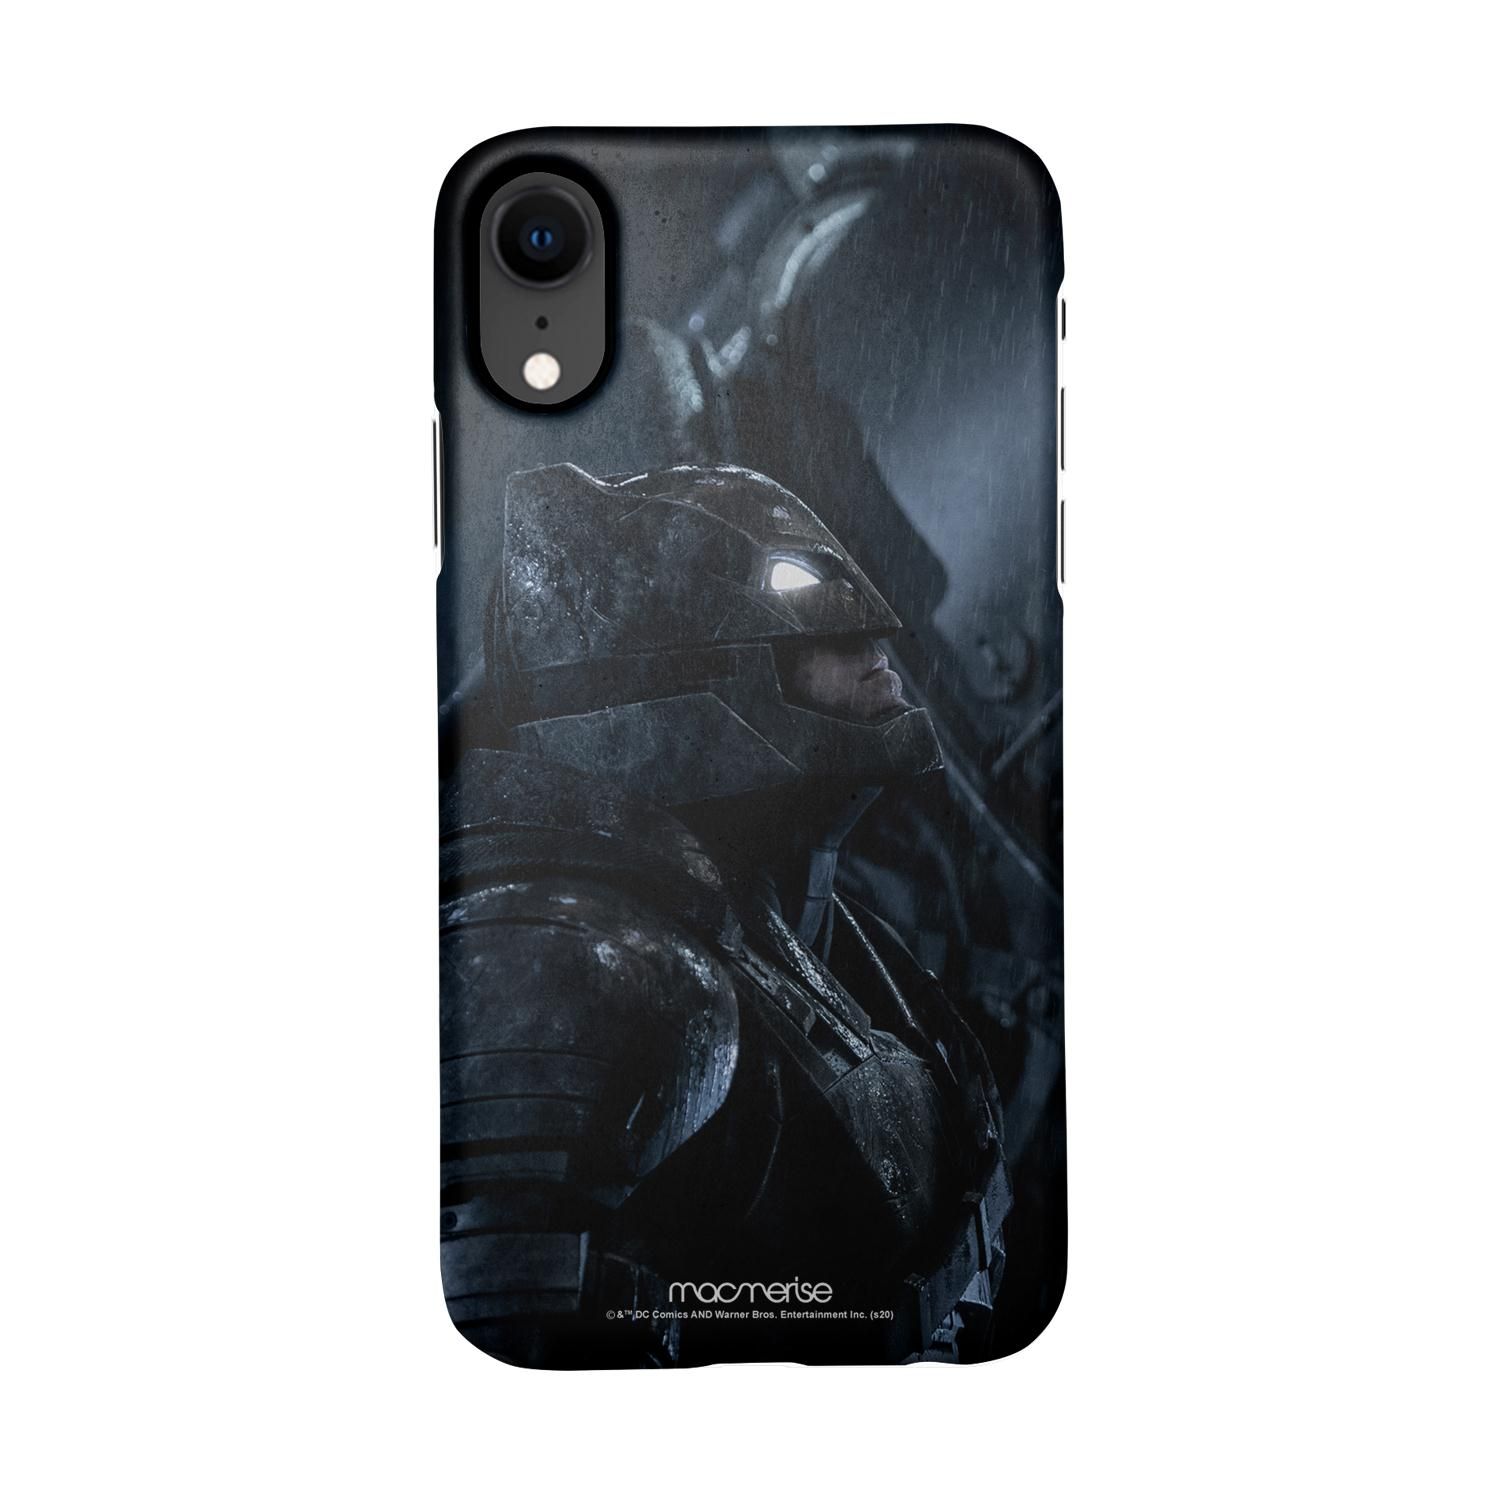 Buy The Victory Glance - Sleek Phone Case for iPhone XR Online